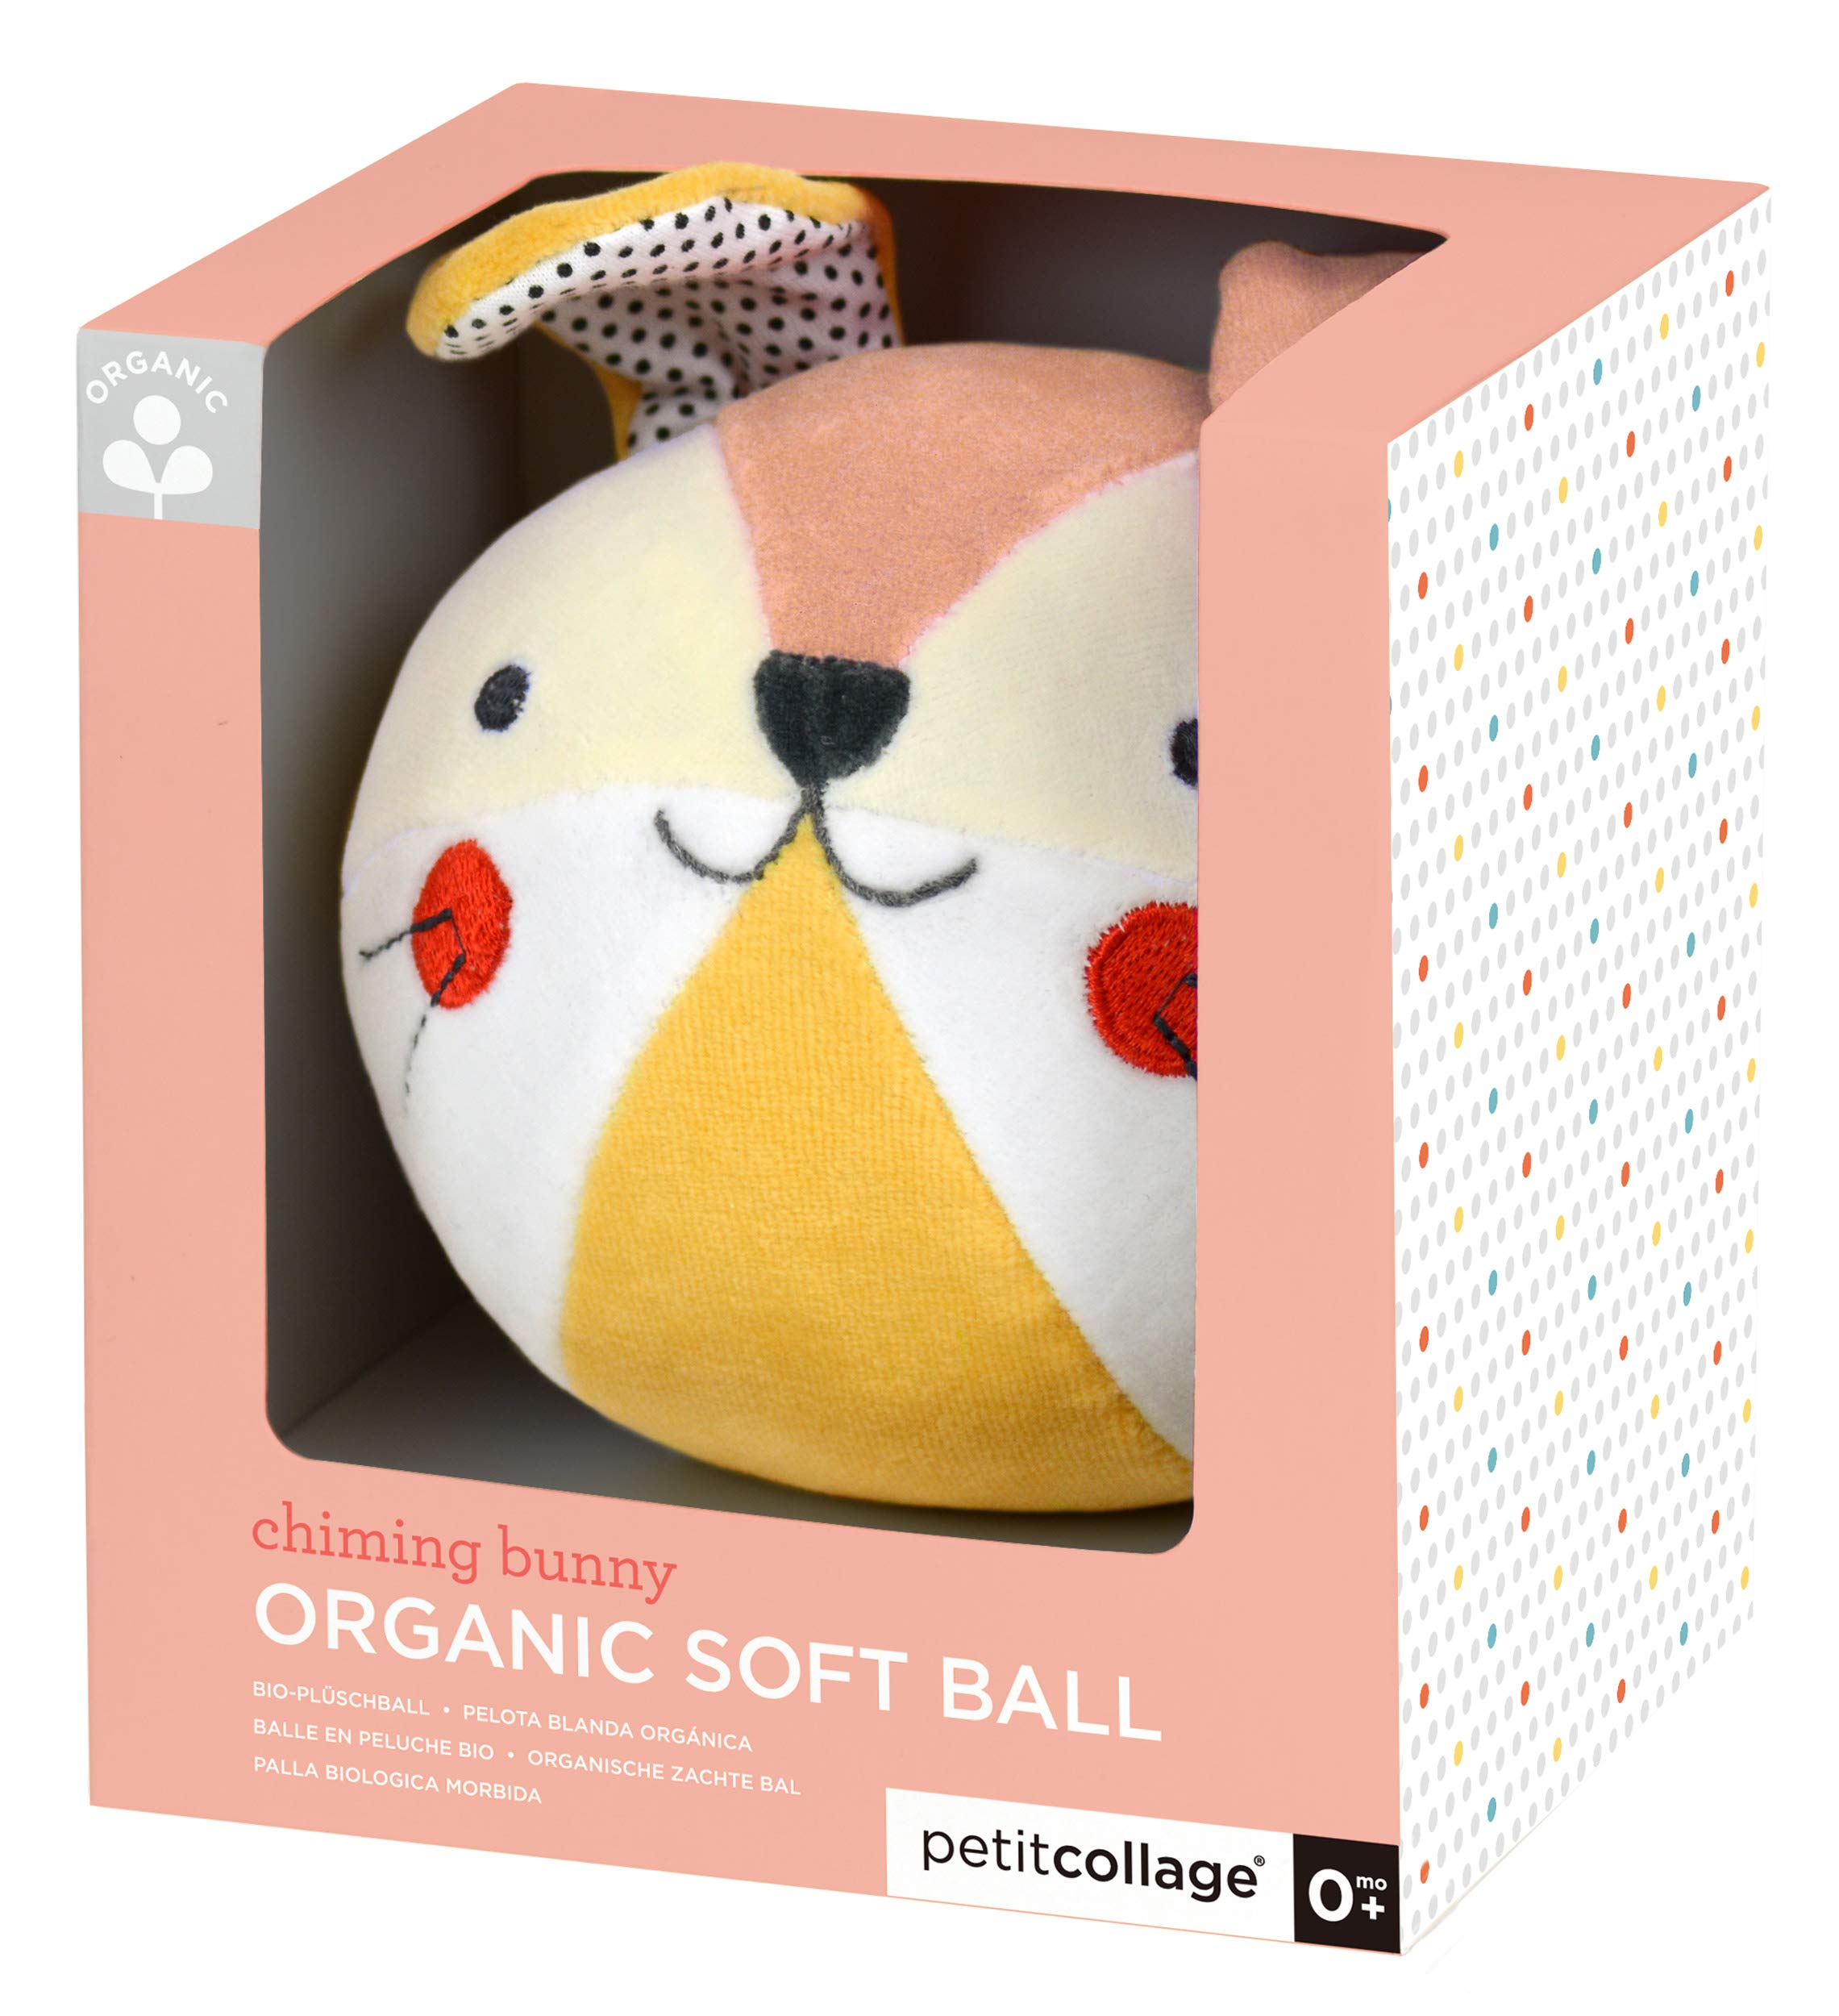 Petit Collage Organic Cotton Soft Chime Busy Baby Ball – Learning Toy for Babies and Toddlers, Measures 6” x 4.75” x 5” – Cute Activity Toy That Encourages Crawling